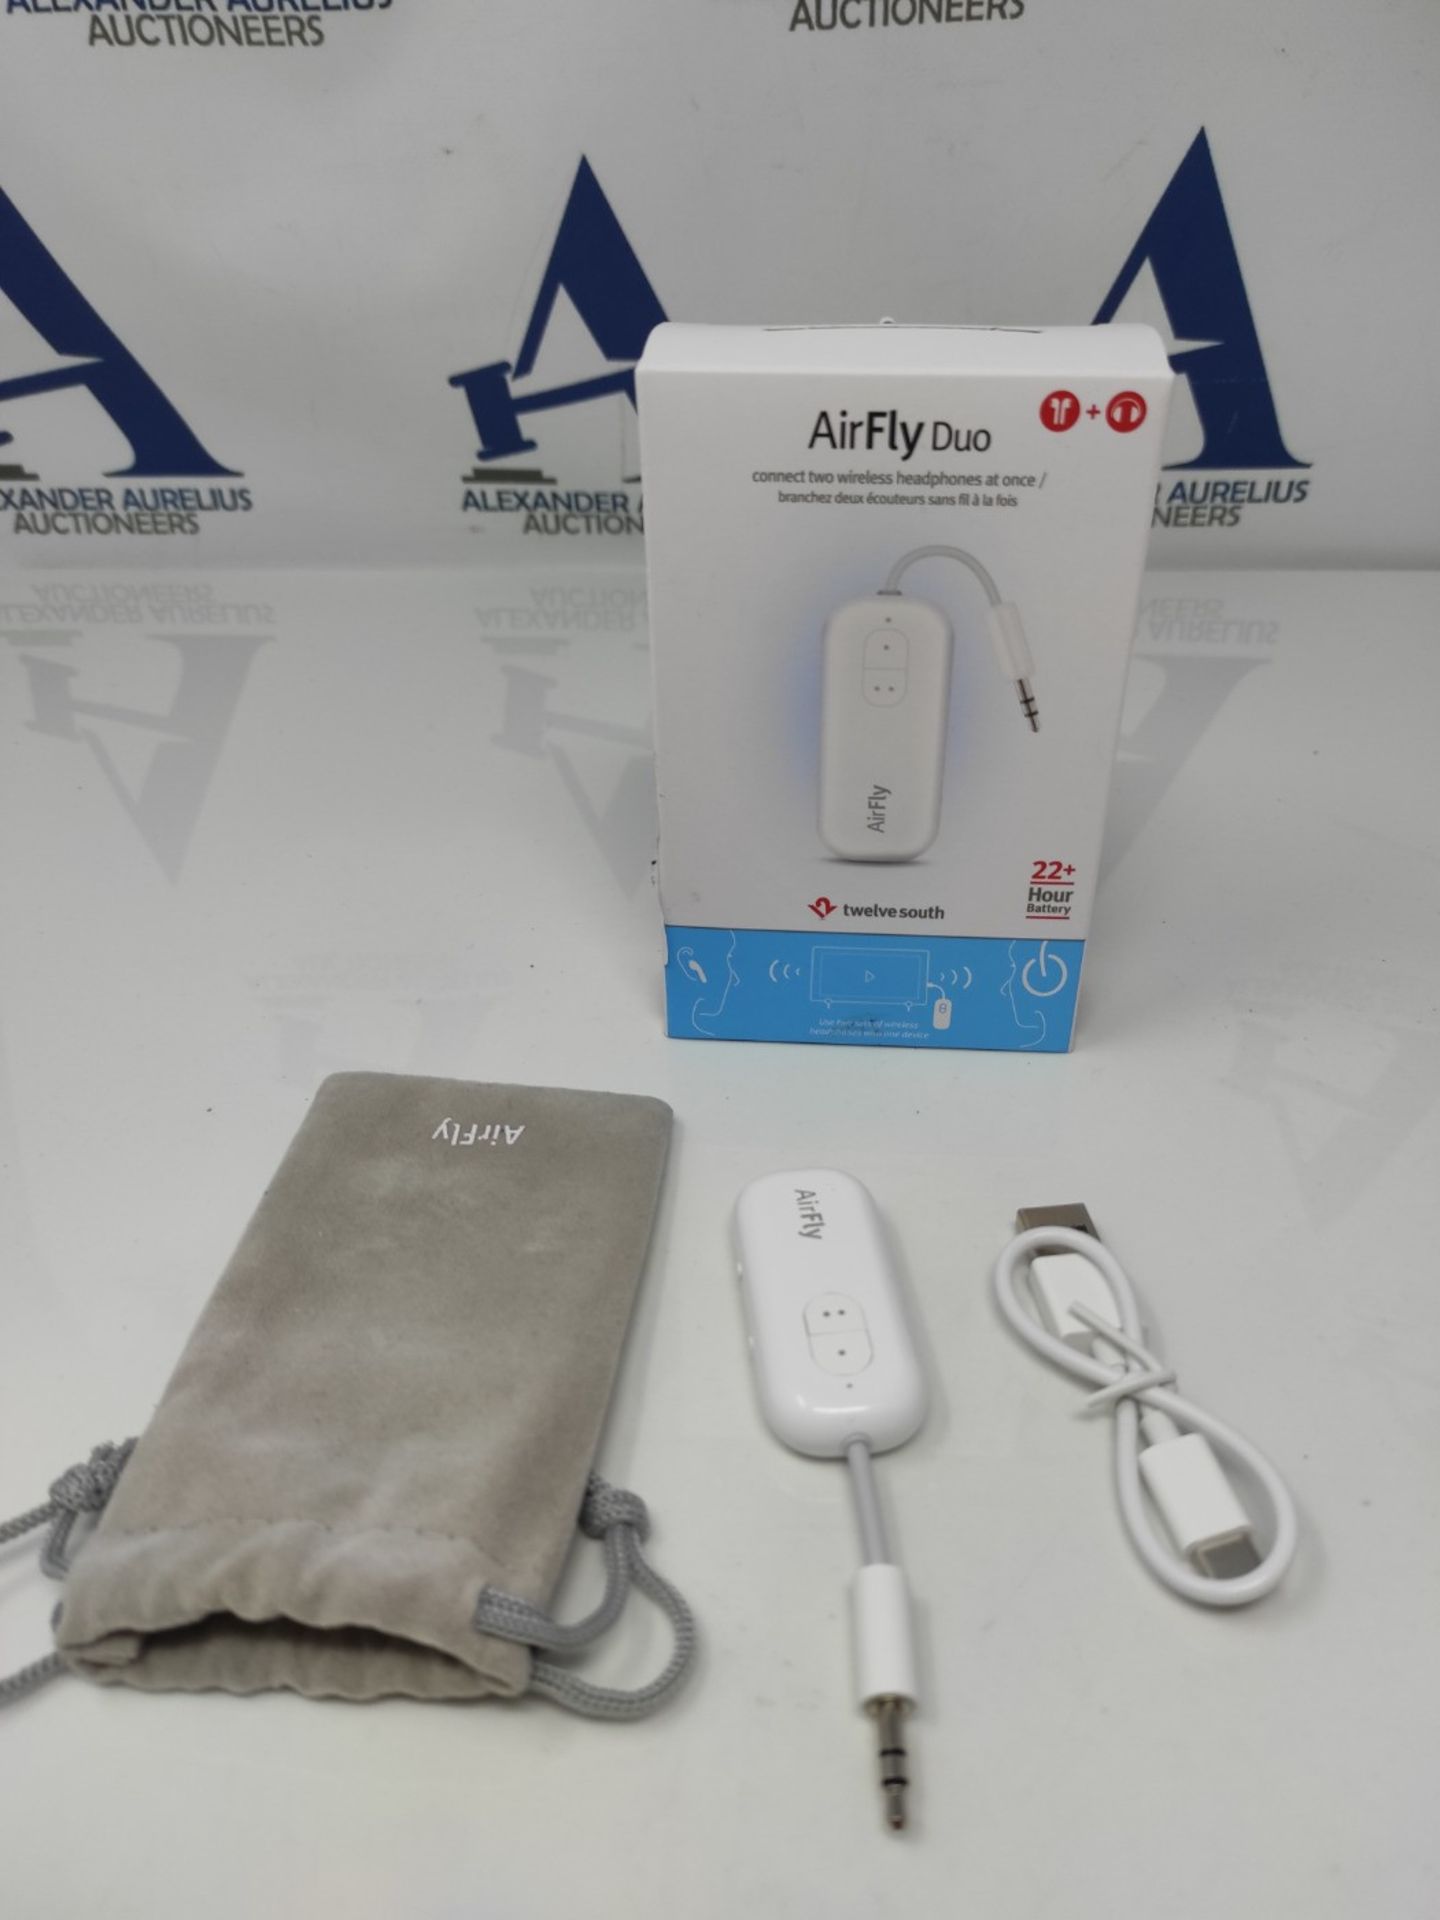 Twelve South AirFly Duo | Wireless transmitter with audio sharing for up to 2 AirPods - Bild 2 aus 2